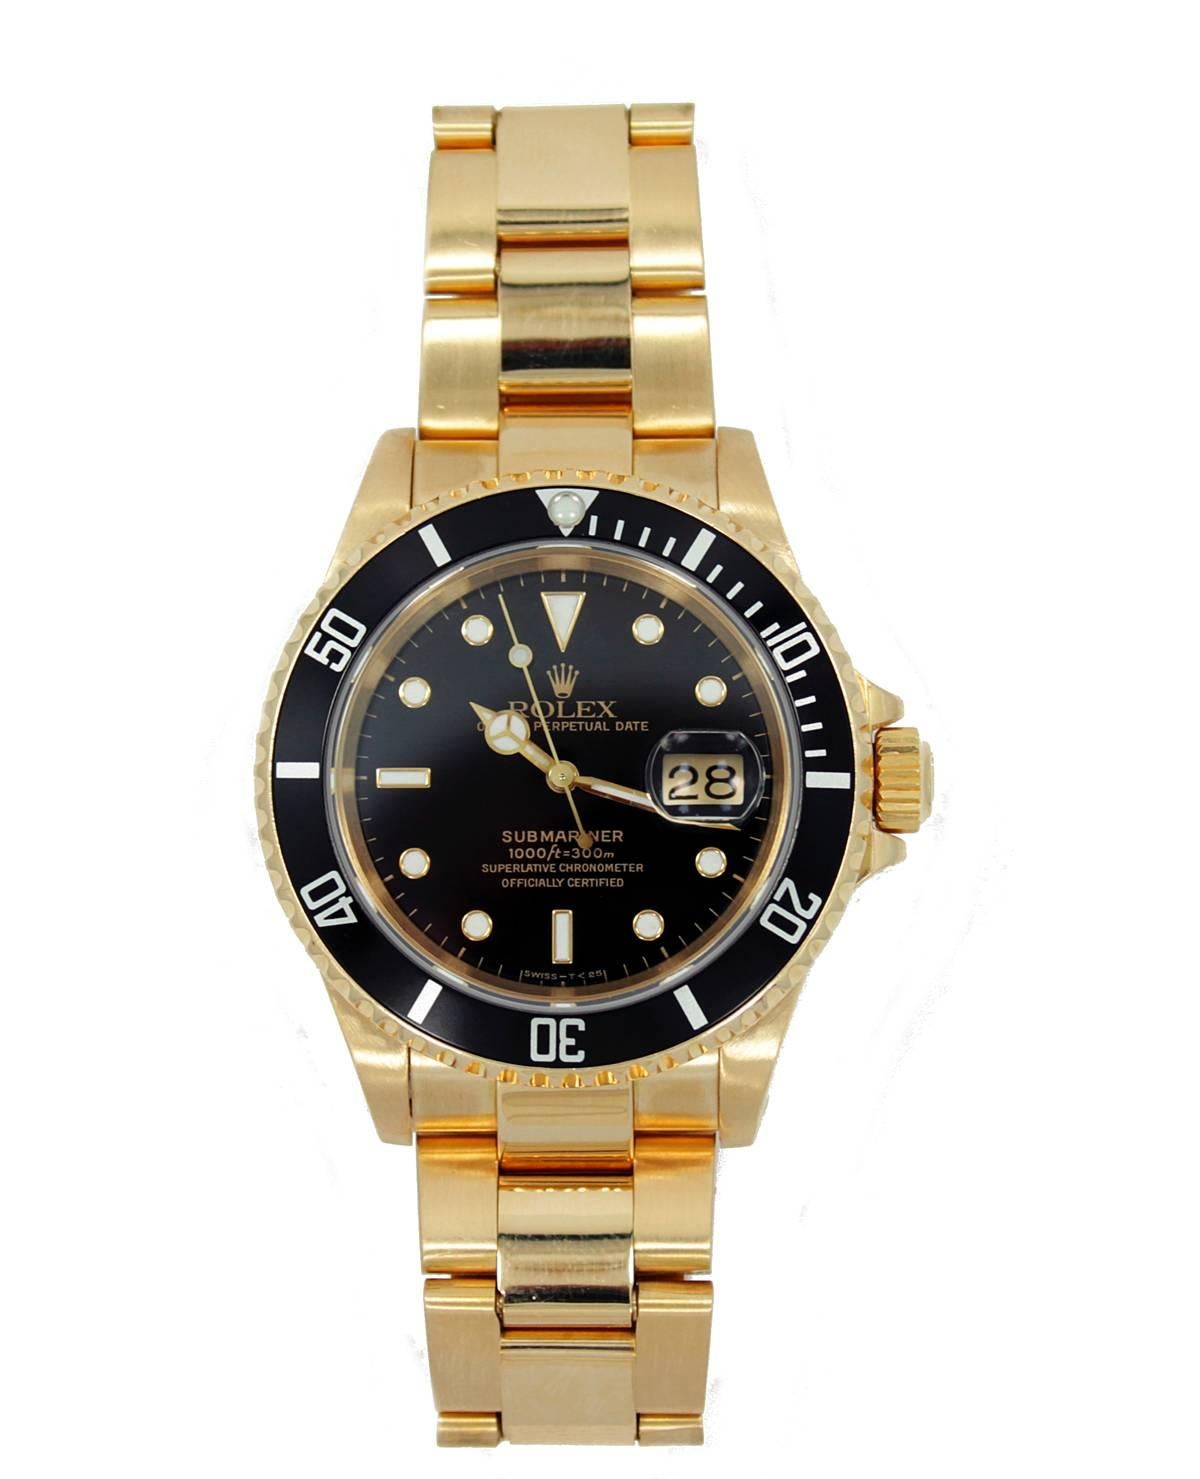 Rolex Submariner 40mm 18K Yellow Gold with Oyster Bracelet, Black Dial and Black Bezel. This watch has been fully serviced and refurbished, in excellent working condition. It is model 16618 and circa 1991.Serial X634XXX. Watch is sold with a one